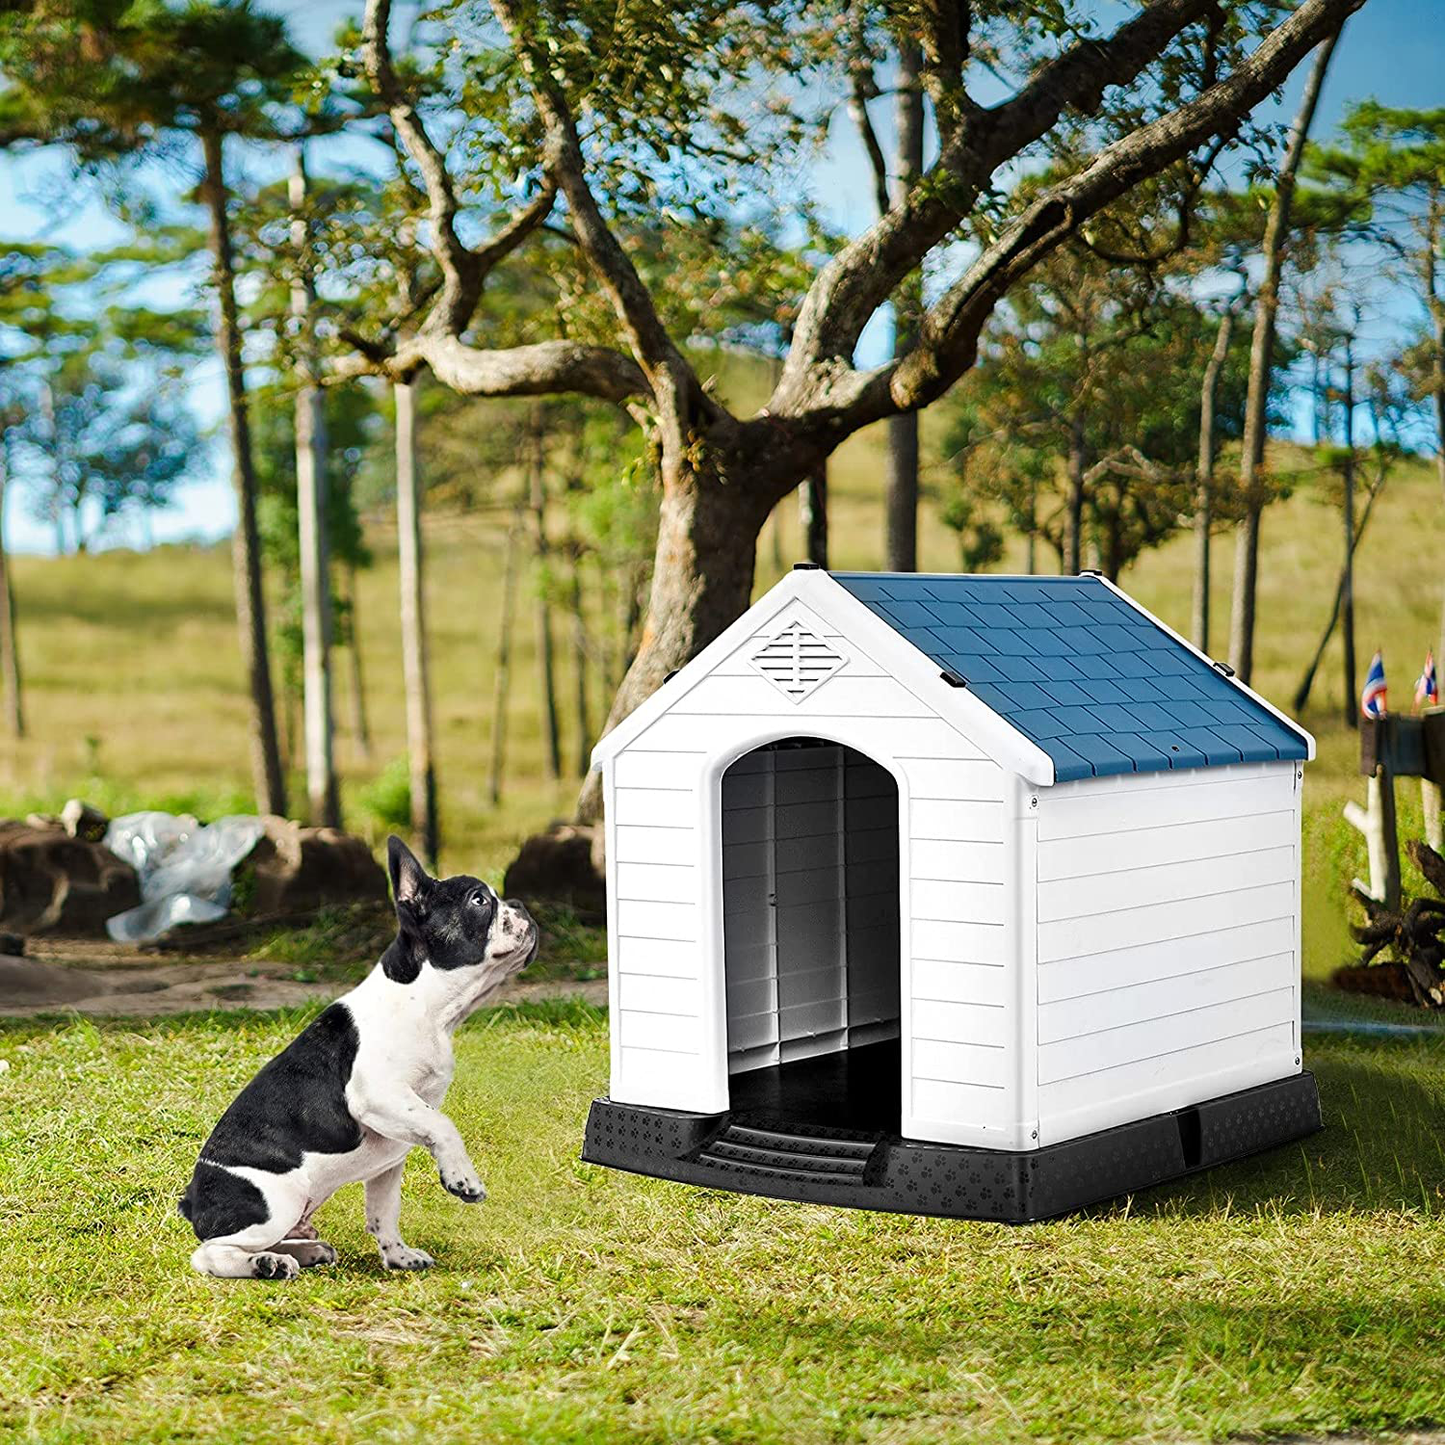 Large Dog House for Large Medium Dogs 34X33X31 Inches Indoor & Outdoor Use Durable Waterproof with Air Vents and Elevated Floor Dog Houses - Easy to Assemble Puppy Shelter Kennel for outside Backyards Animals & Pet Supplies > Pet Supplies > Dog Supplies > Dog Houses Toolsempire   